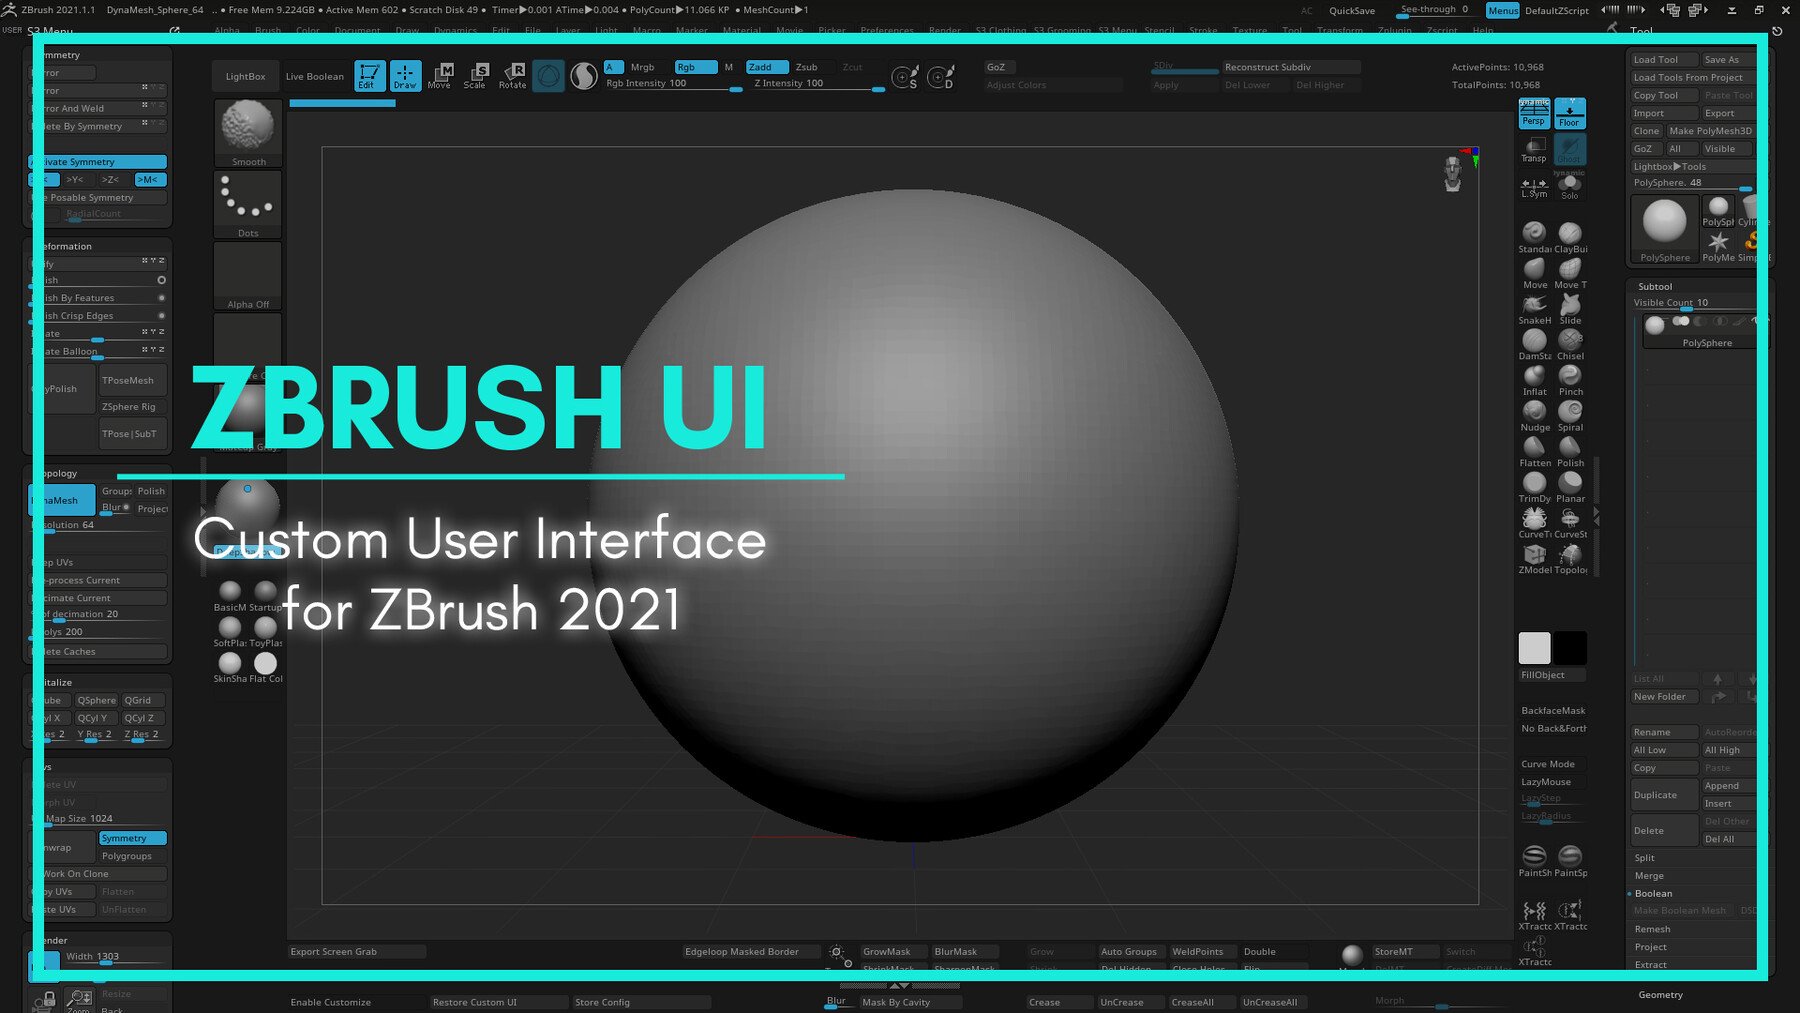 customize zbrush screen site forums.cgsociety.org